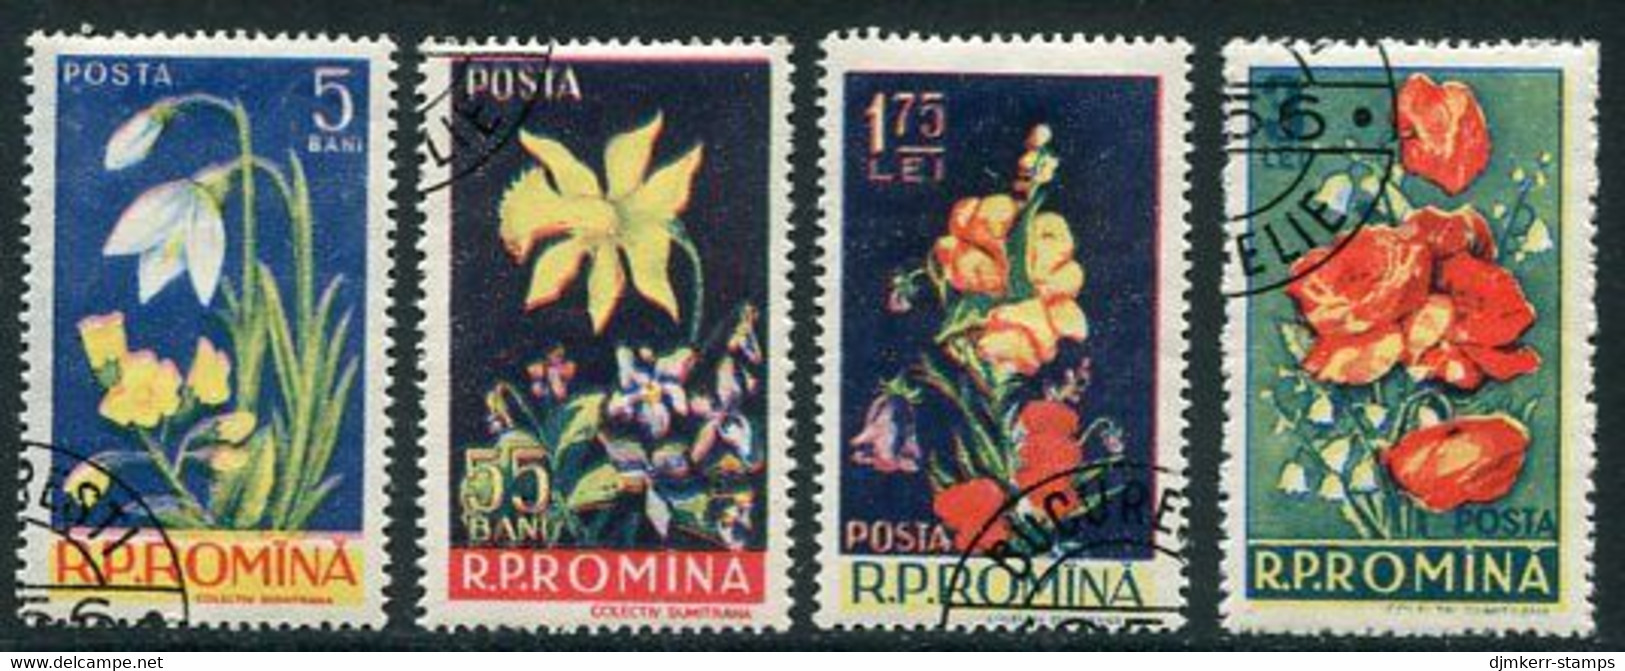 ROMANIA 1956 Flowers Used.  Michel 1589-92 - Used Stamps